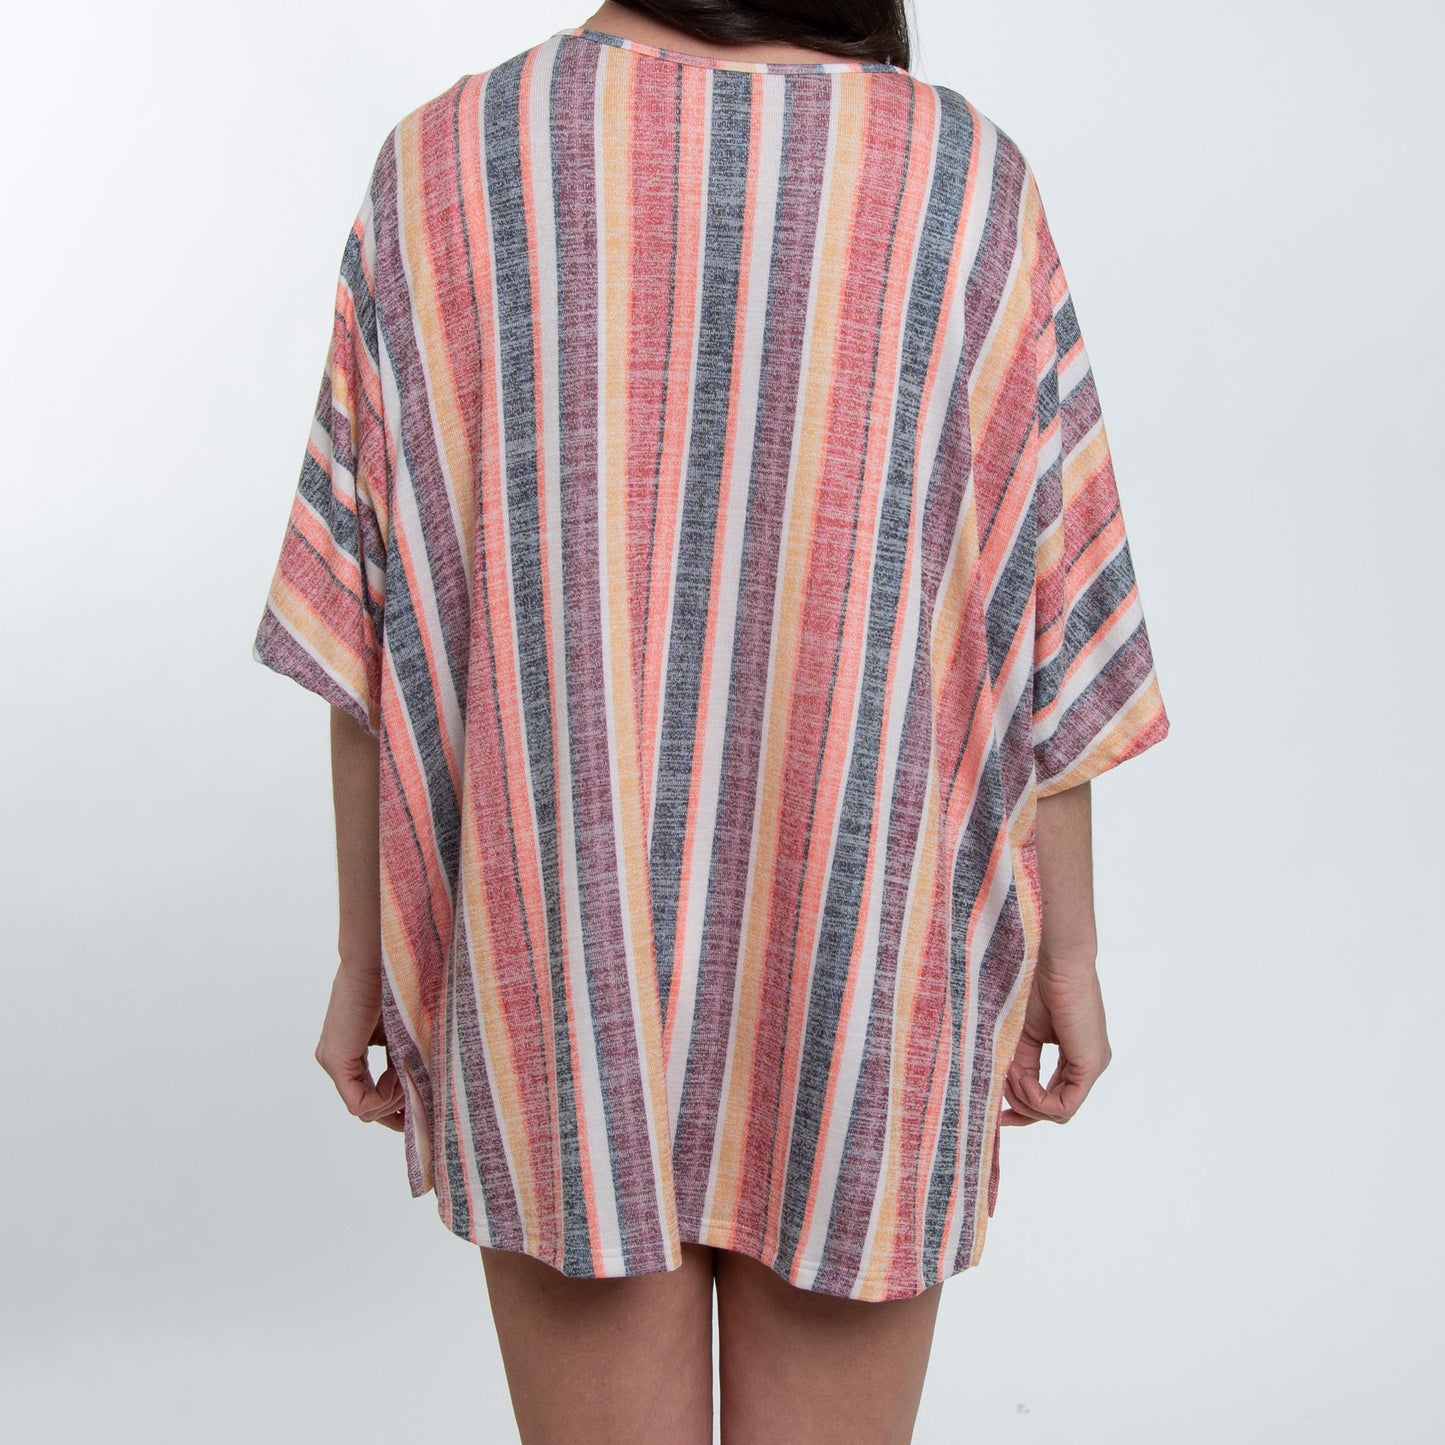 Elsie Sunset Stripe Printed One Size Beach Swimsuit Cover Up